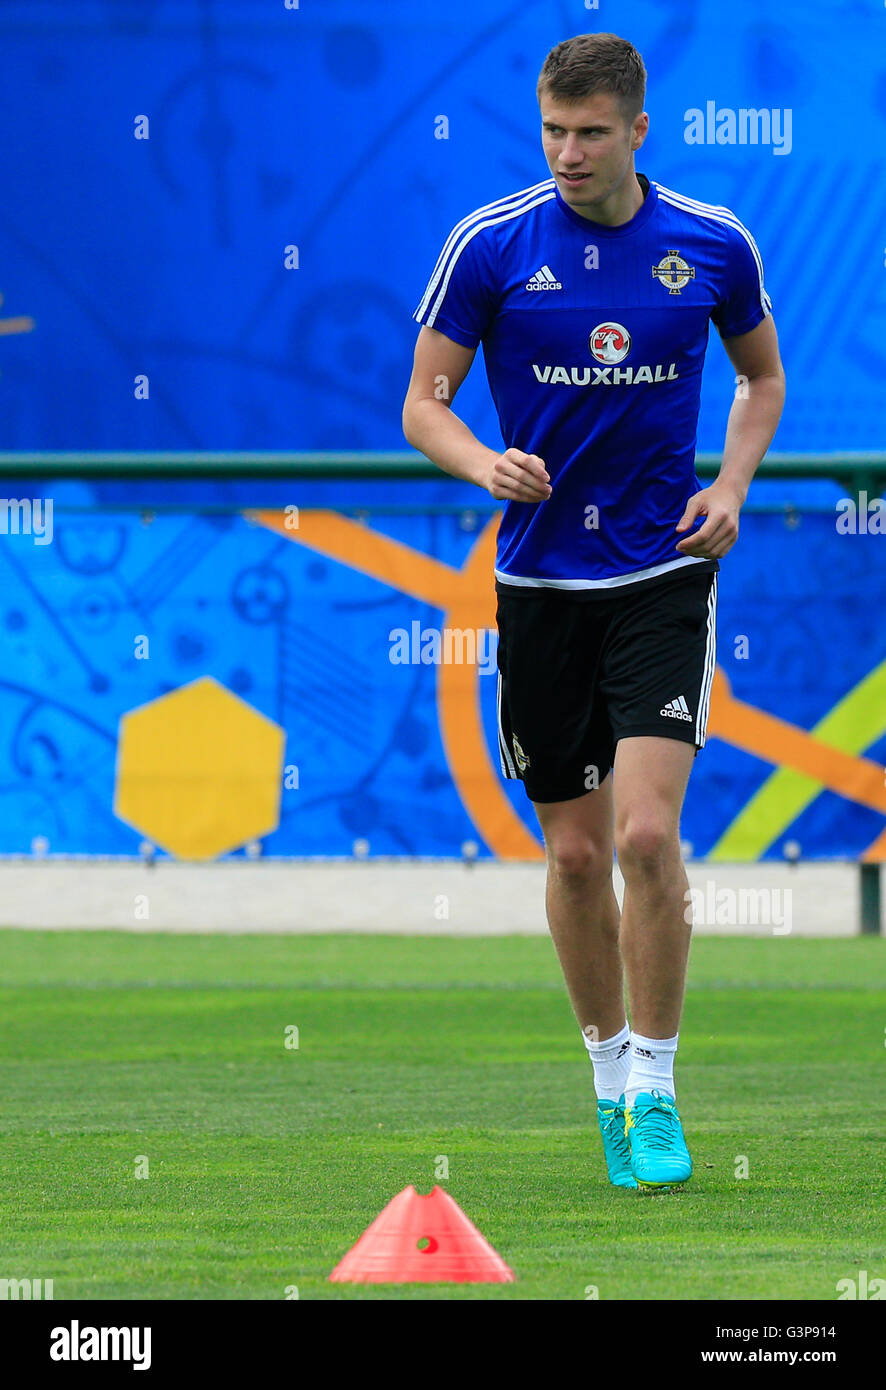 Northern Ireland's Paddy McNair during a training session at Saint-George-de-Reneins. PRESS ASSOCIATION Photo. Picture date: Tuesday June 14, 2016. See PA story SOCCER N Ireland. Photo credit should read: Jonathan Brady/PA Wire. Stock Photo